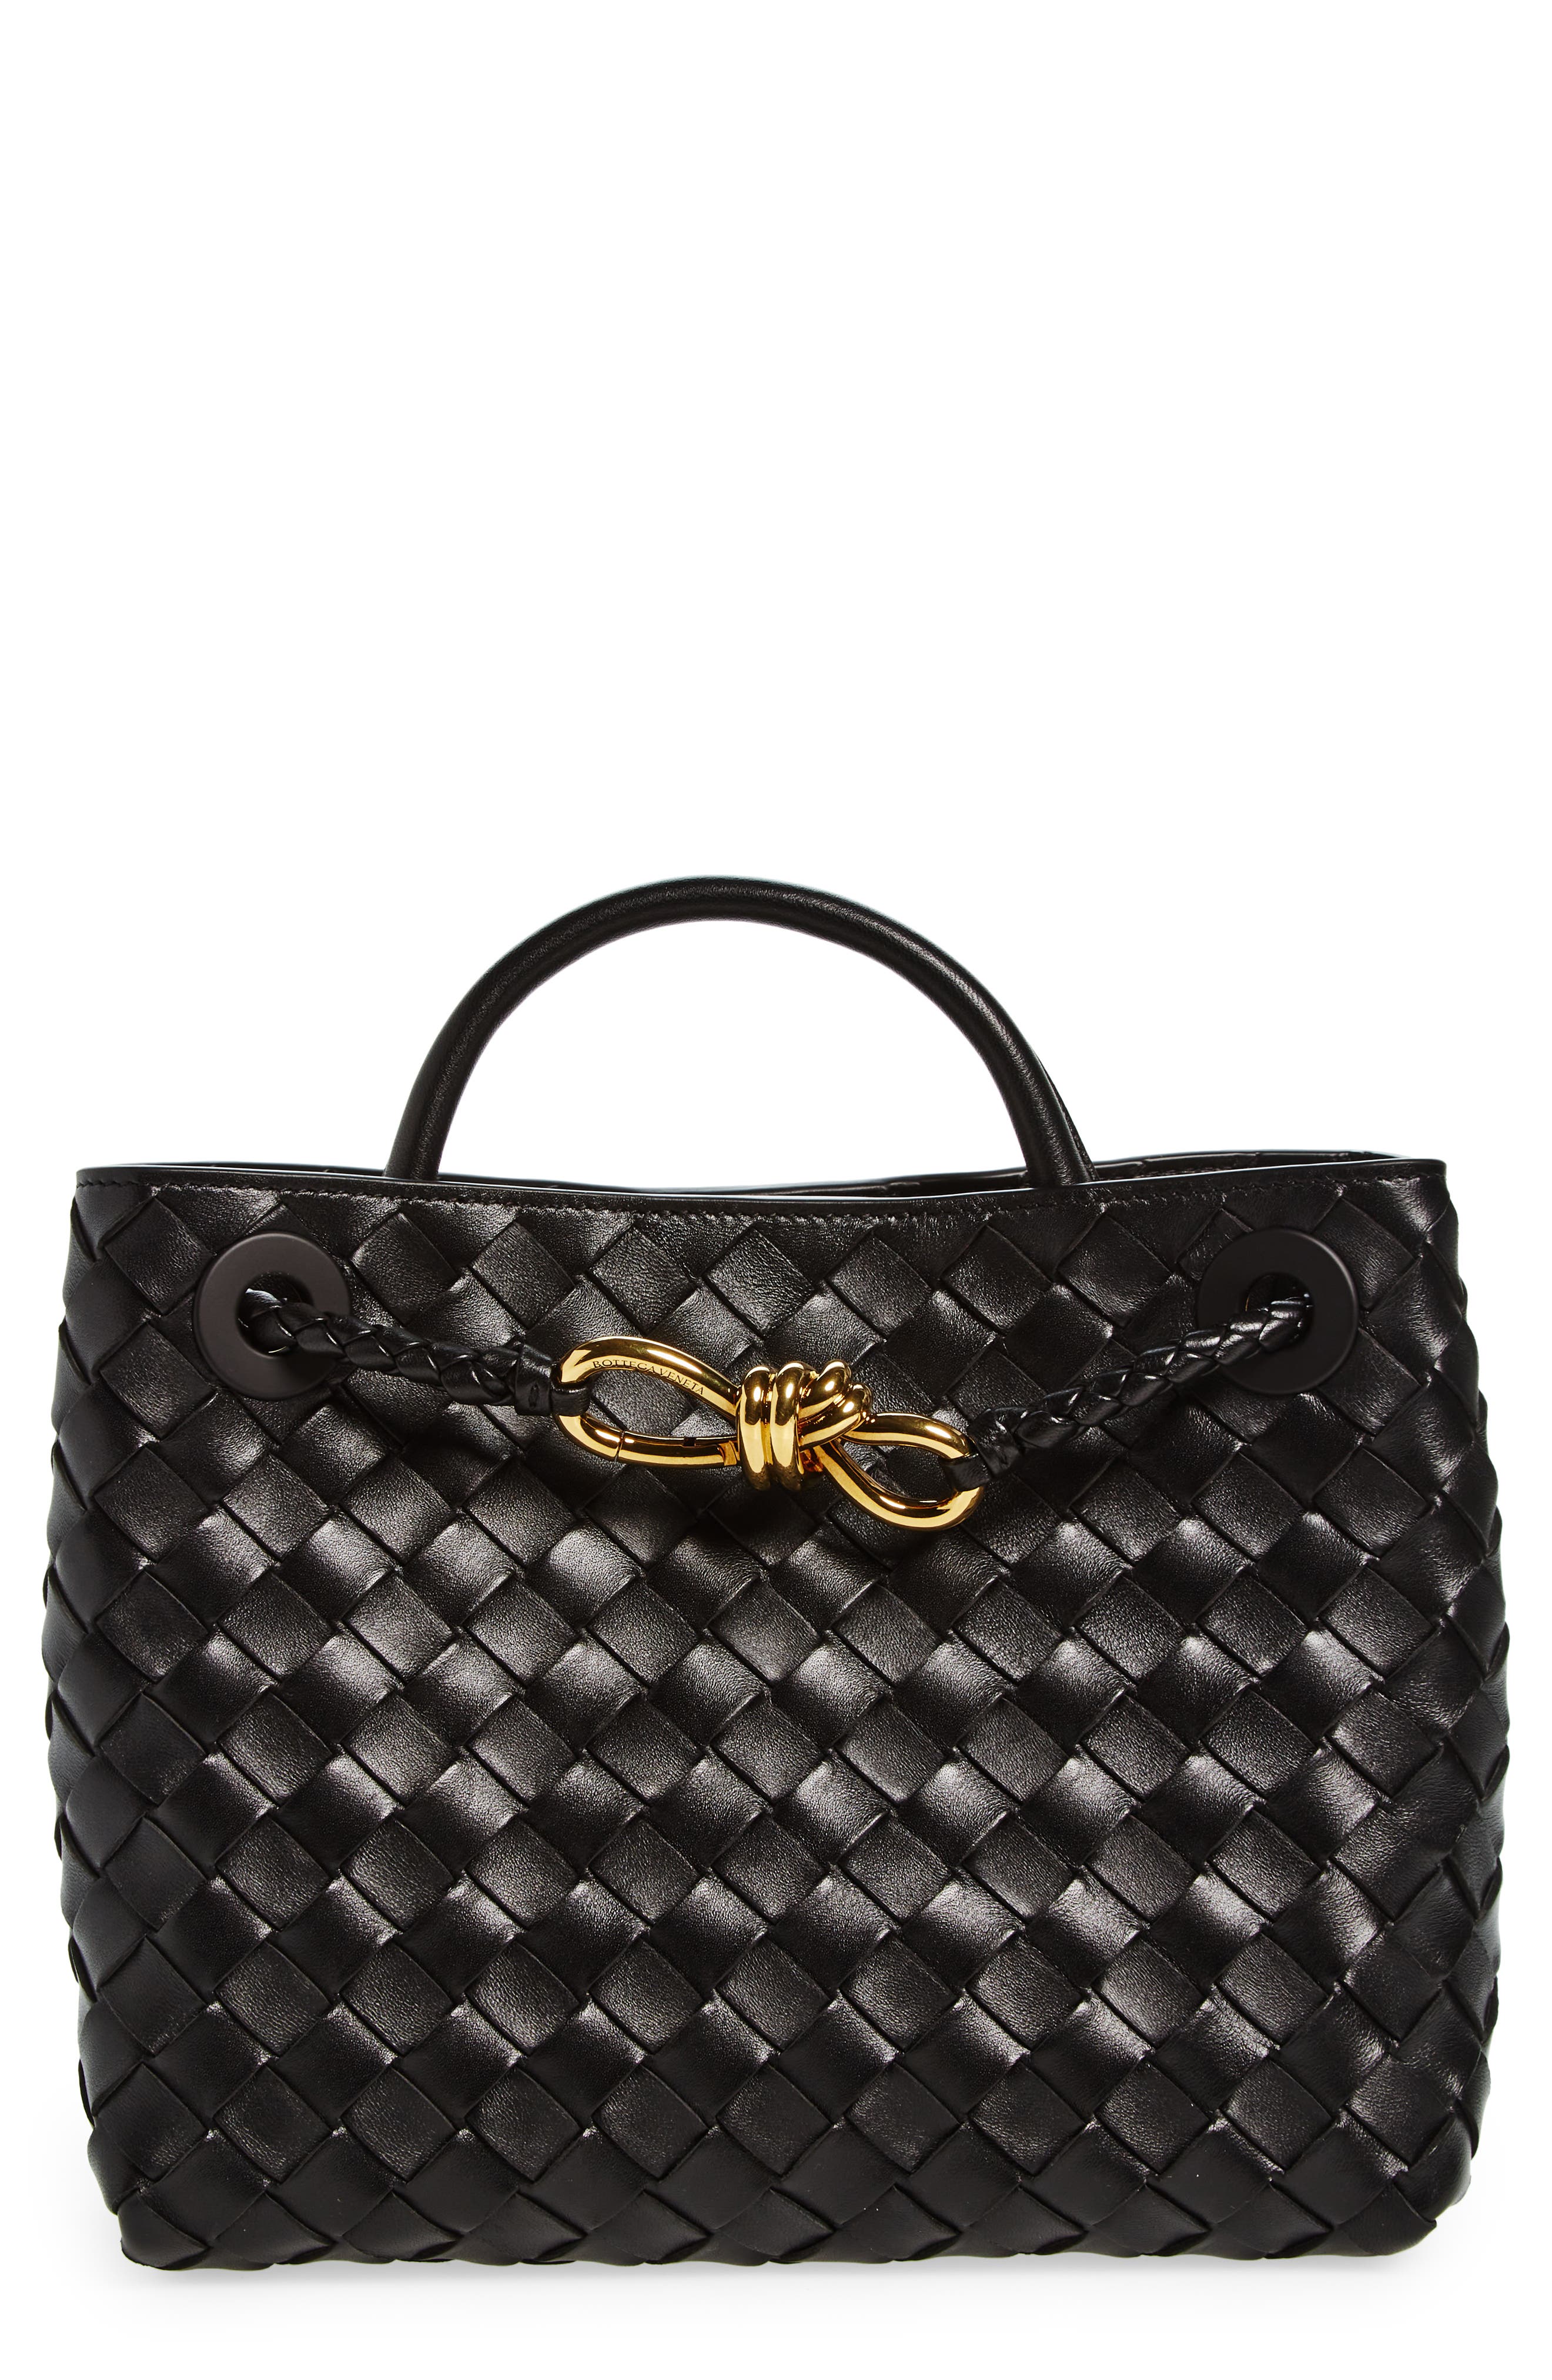 The Best Bottega Veneta Bags to Invest Your Money In | Who What Wear